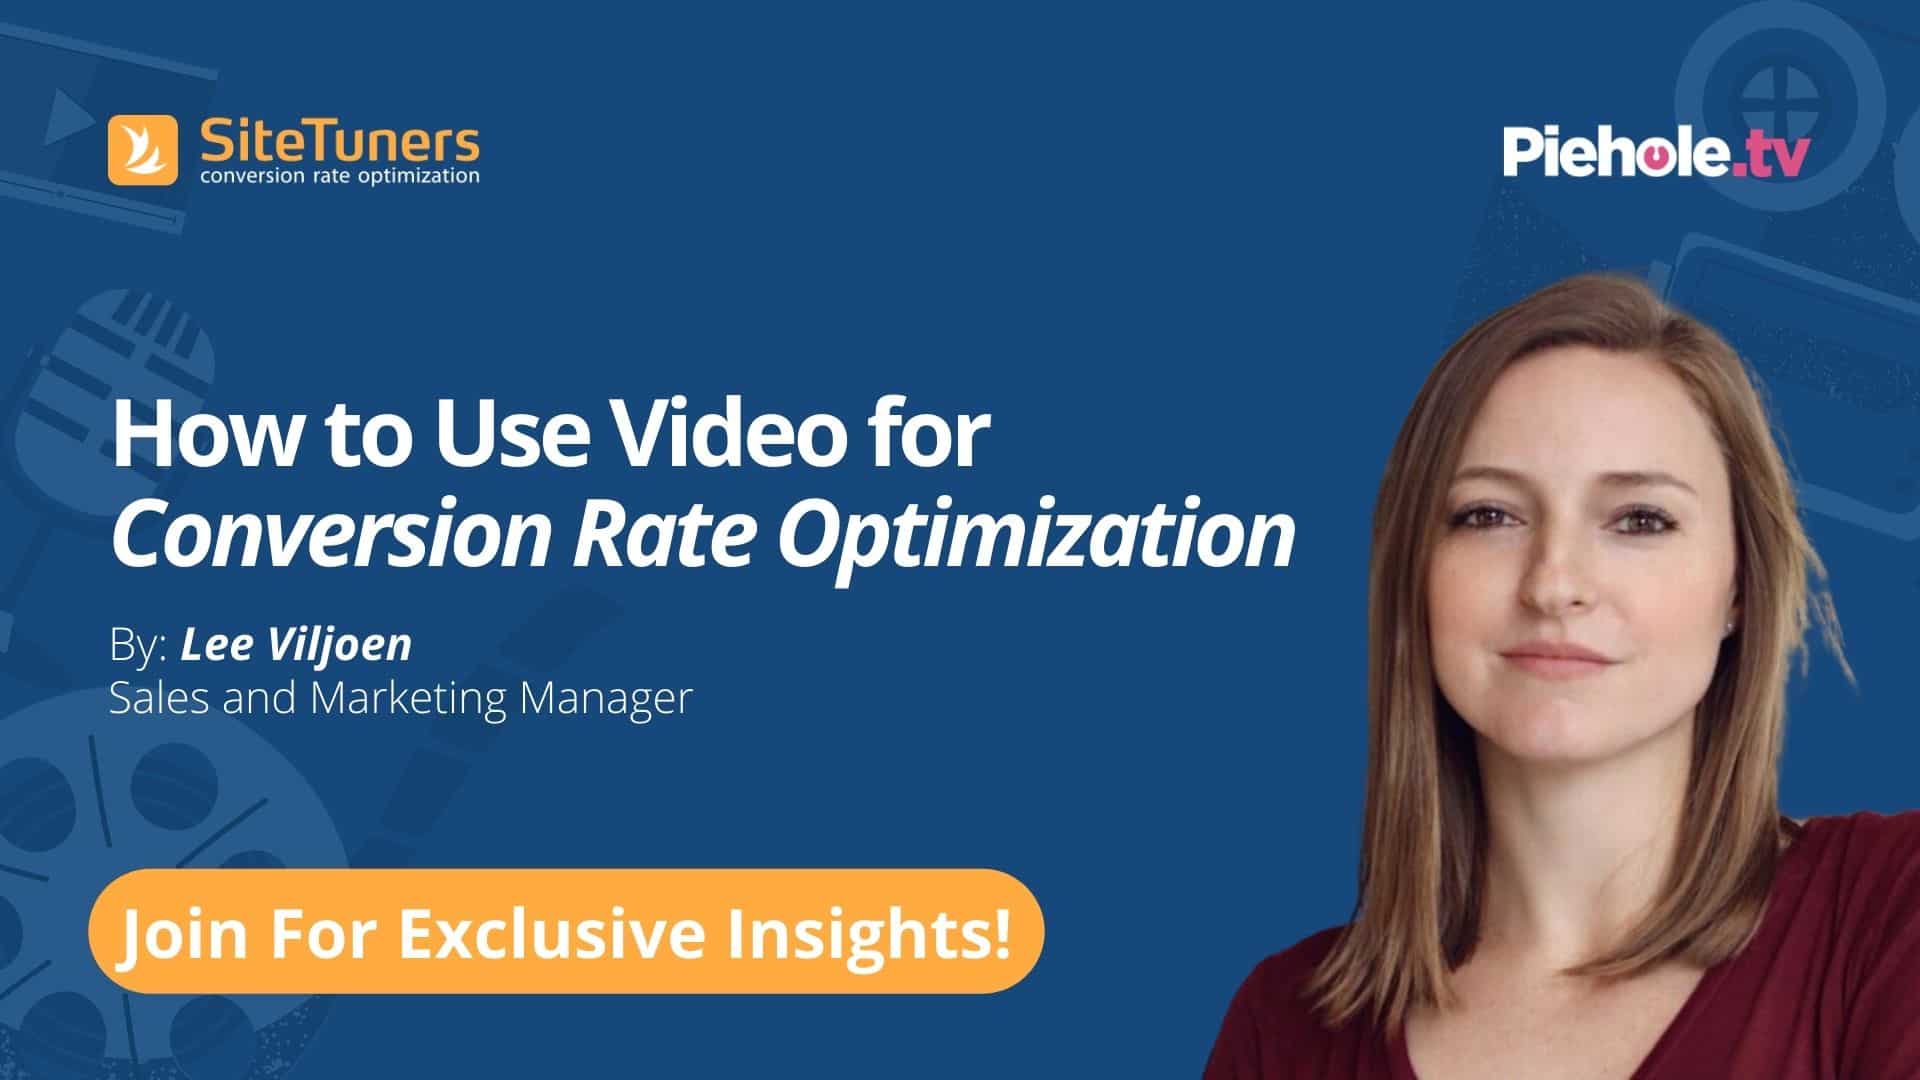 Webinar about using video for CRO.